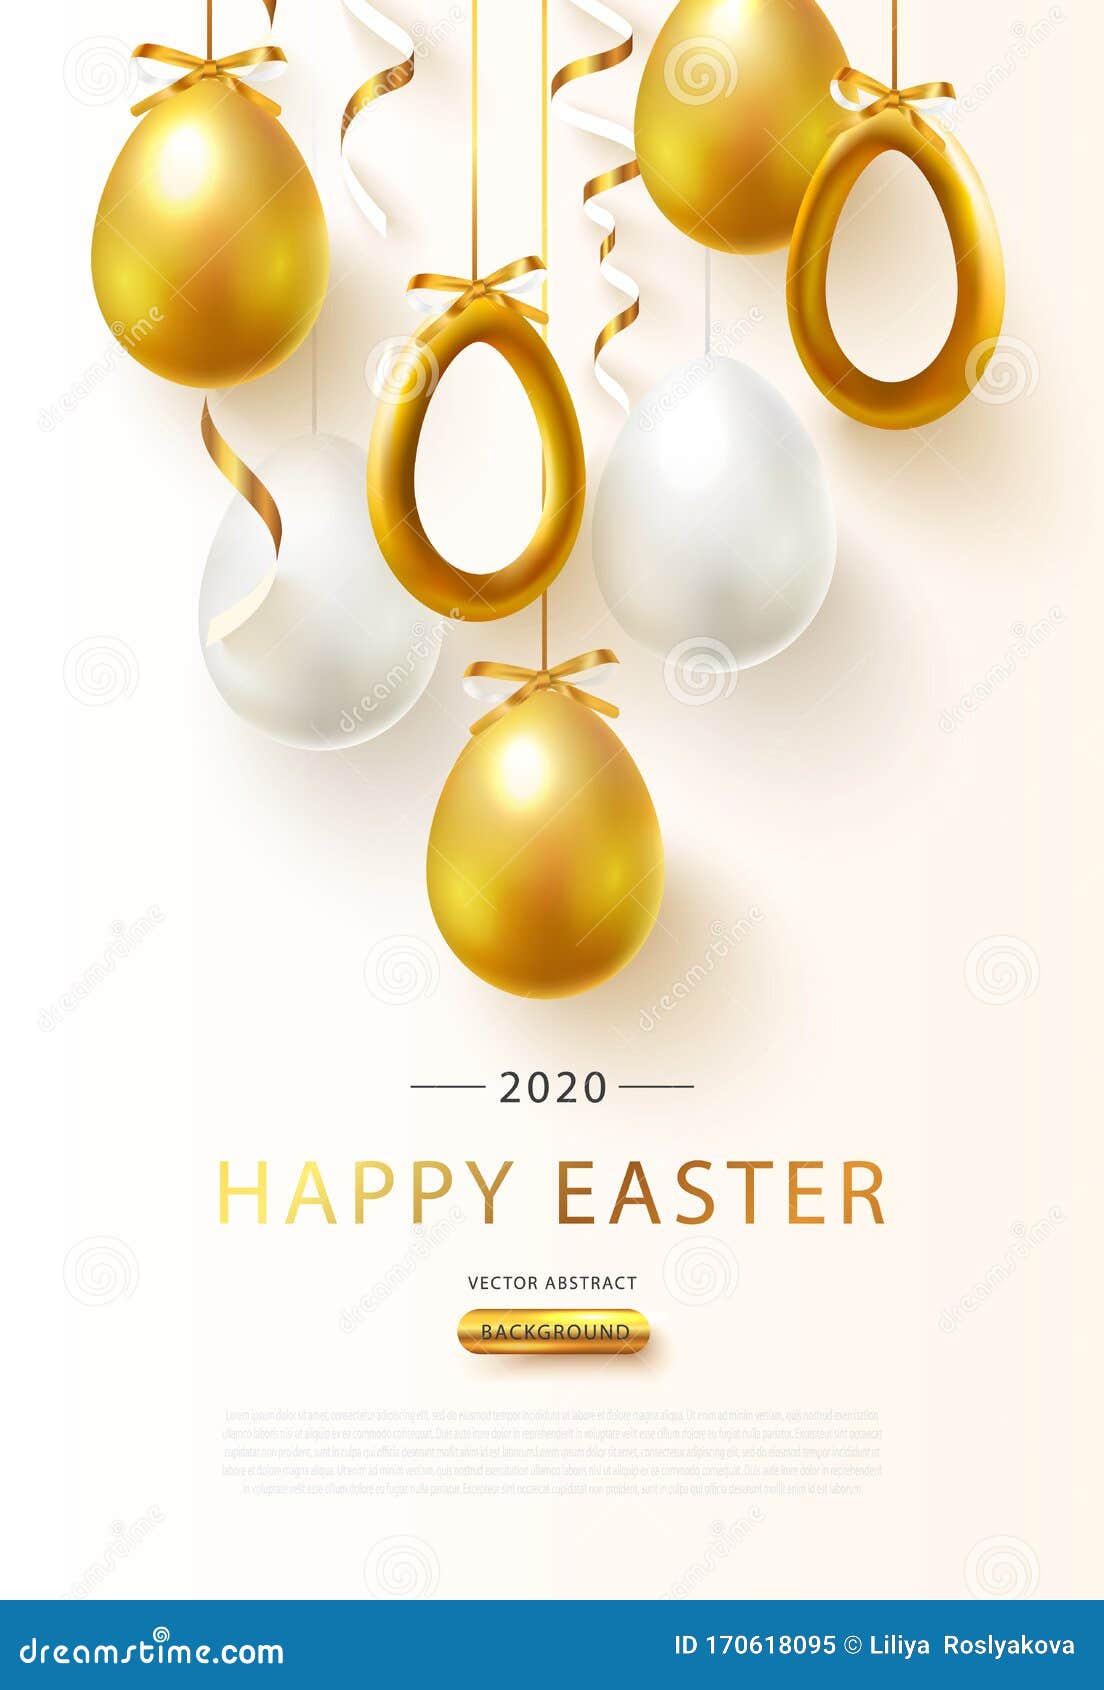 Happy Easter 2020 Background with Realistic Golden Eggs and ...